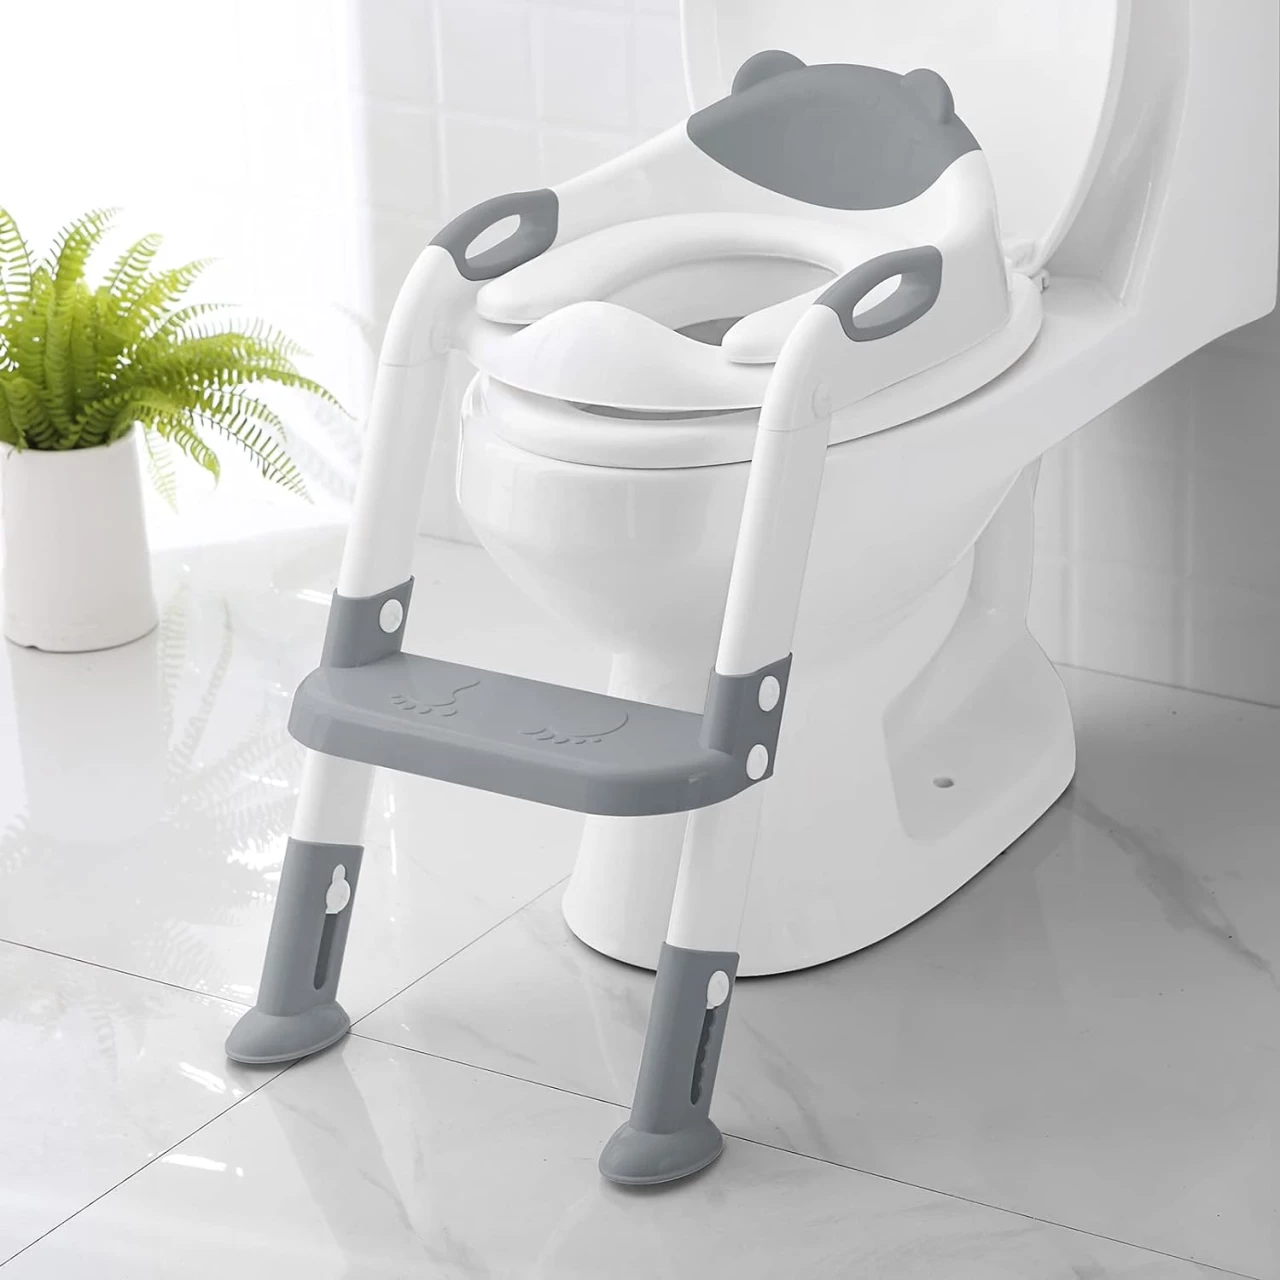 Toilet Potty Training Seat with Step Stool Ladder,SKYROKU Potty Training Toilet for Kids Boys Girls Toddlers-Comfortable Safe Potty Seat